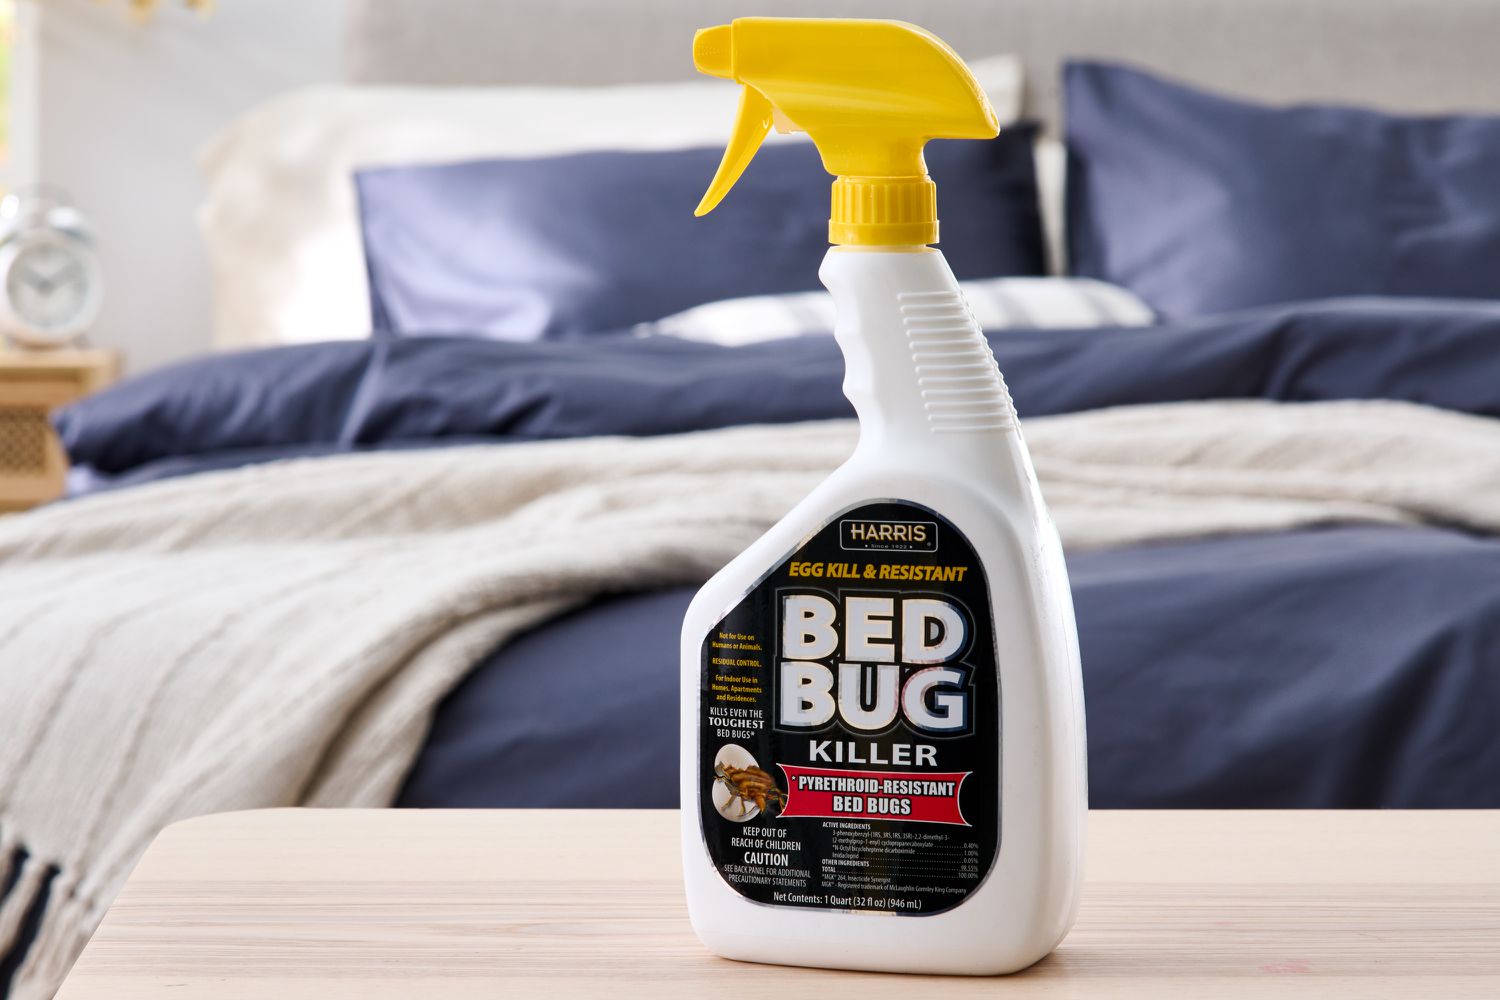 What Can I Spray On My Mattress To Kill Bed Bugs